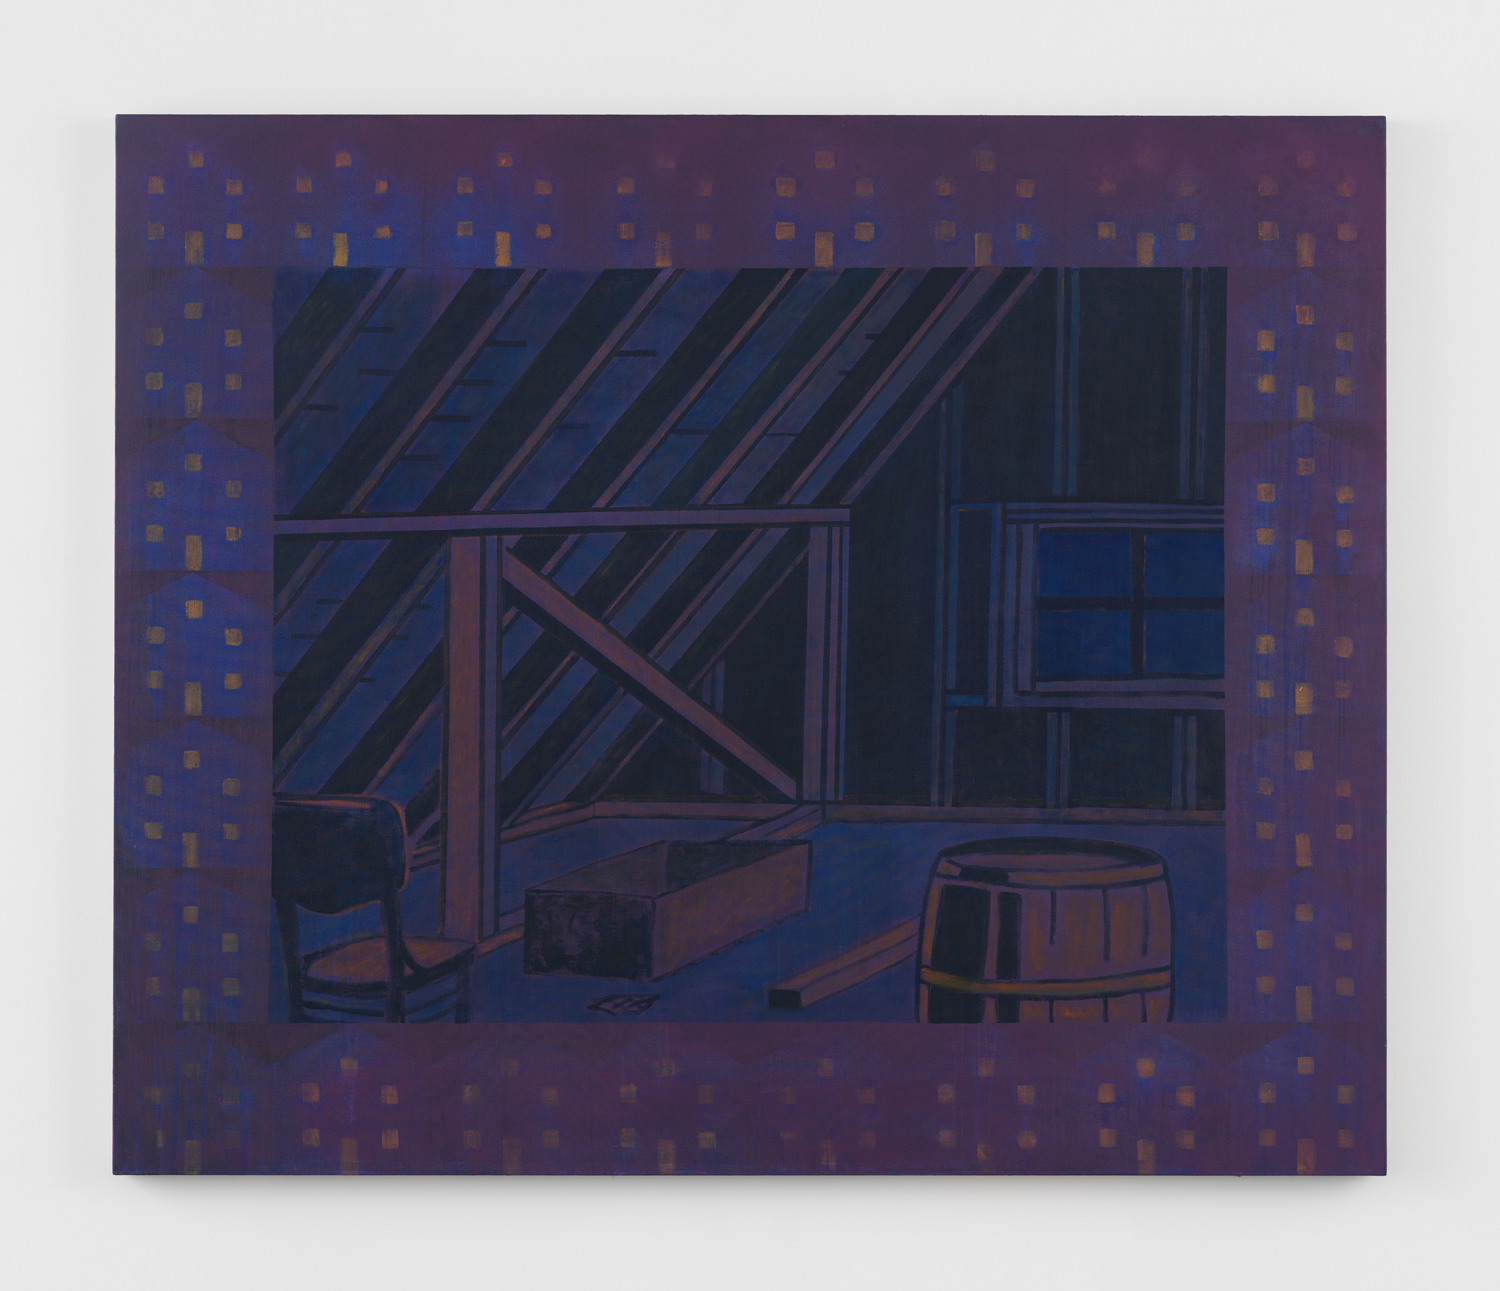 Zach Bruder, Attic, 2023, Acrylic and Flashe on linen, 60 x 72 in.